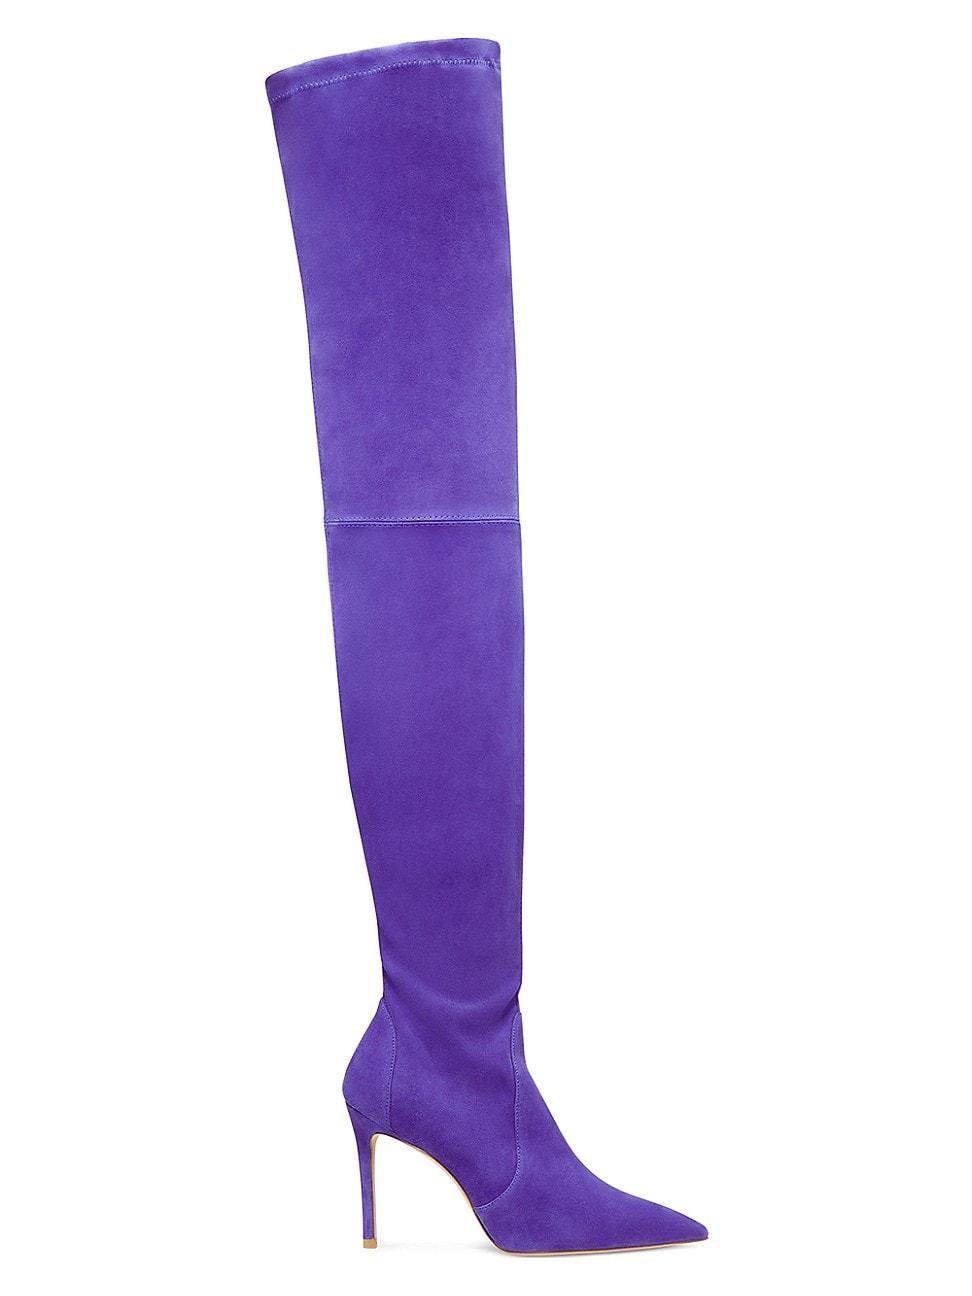 Stuart Weitzman Ultrastuart 100 Stretch Pointed Toe Over the Knee Boot Product Image